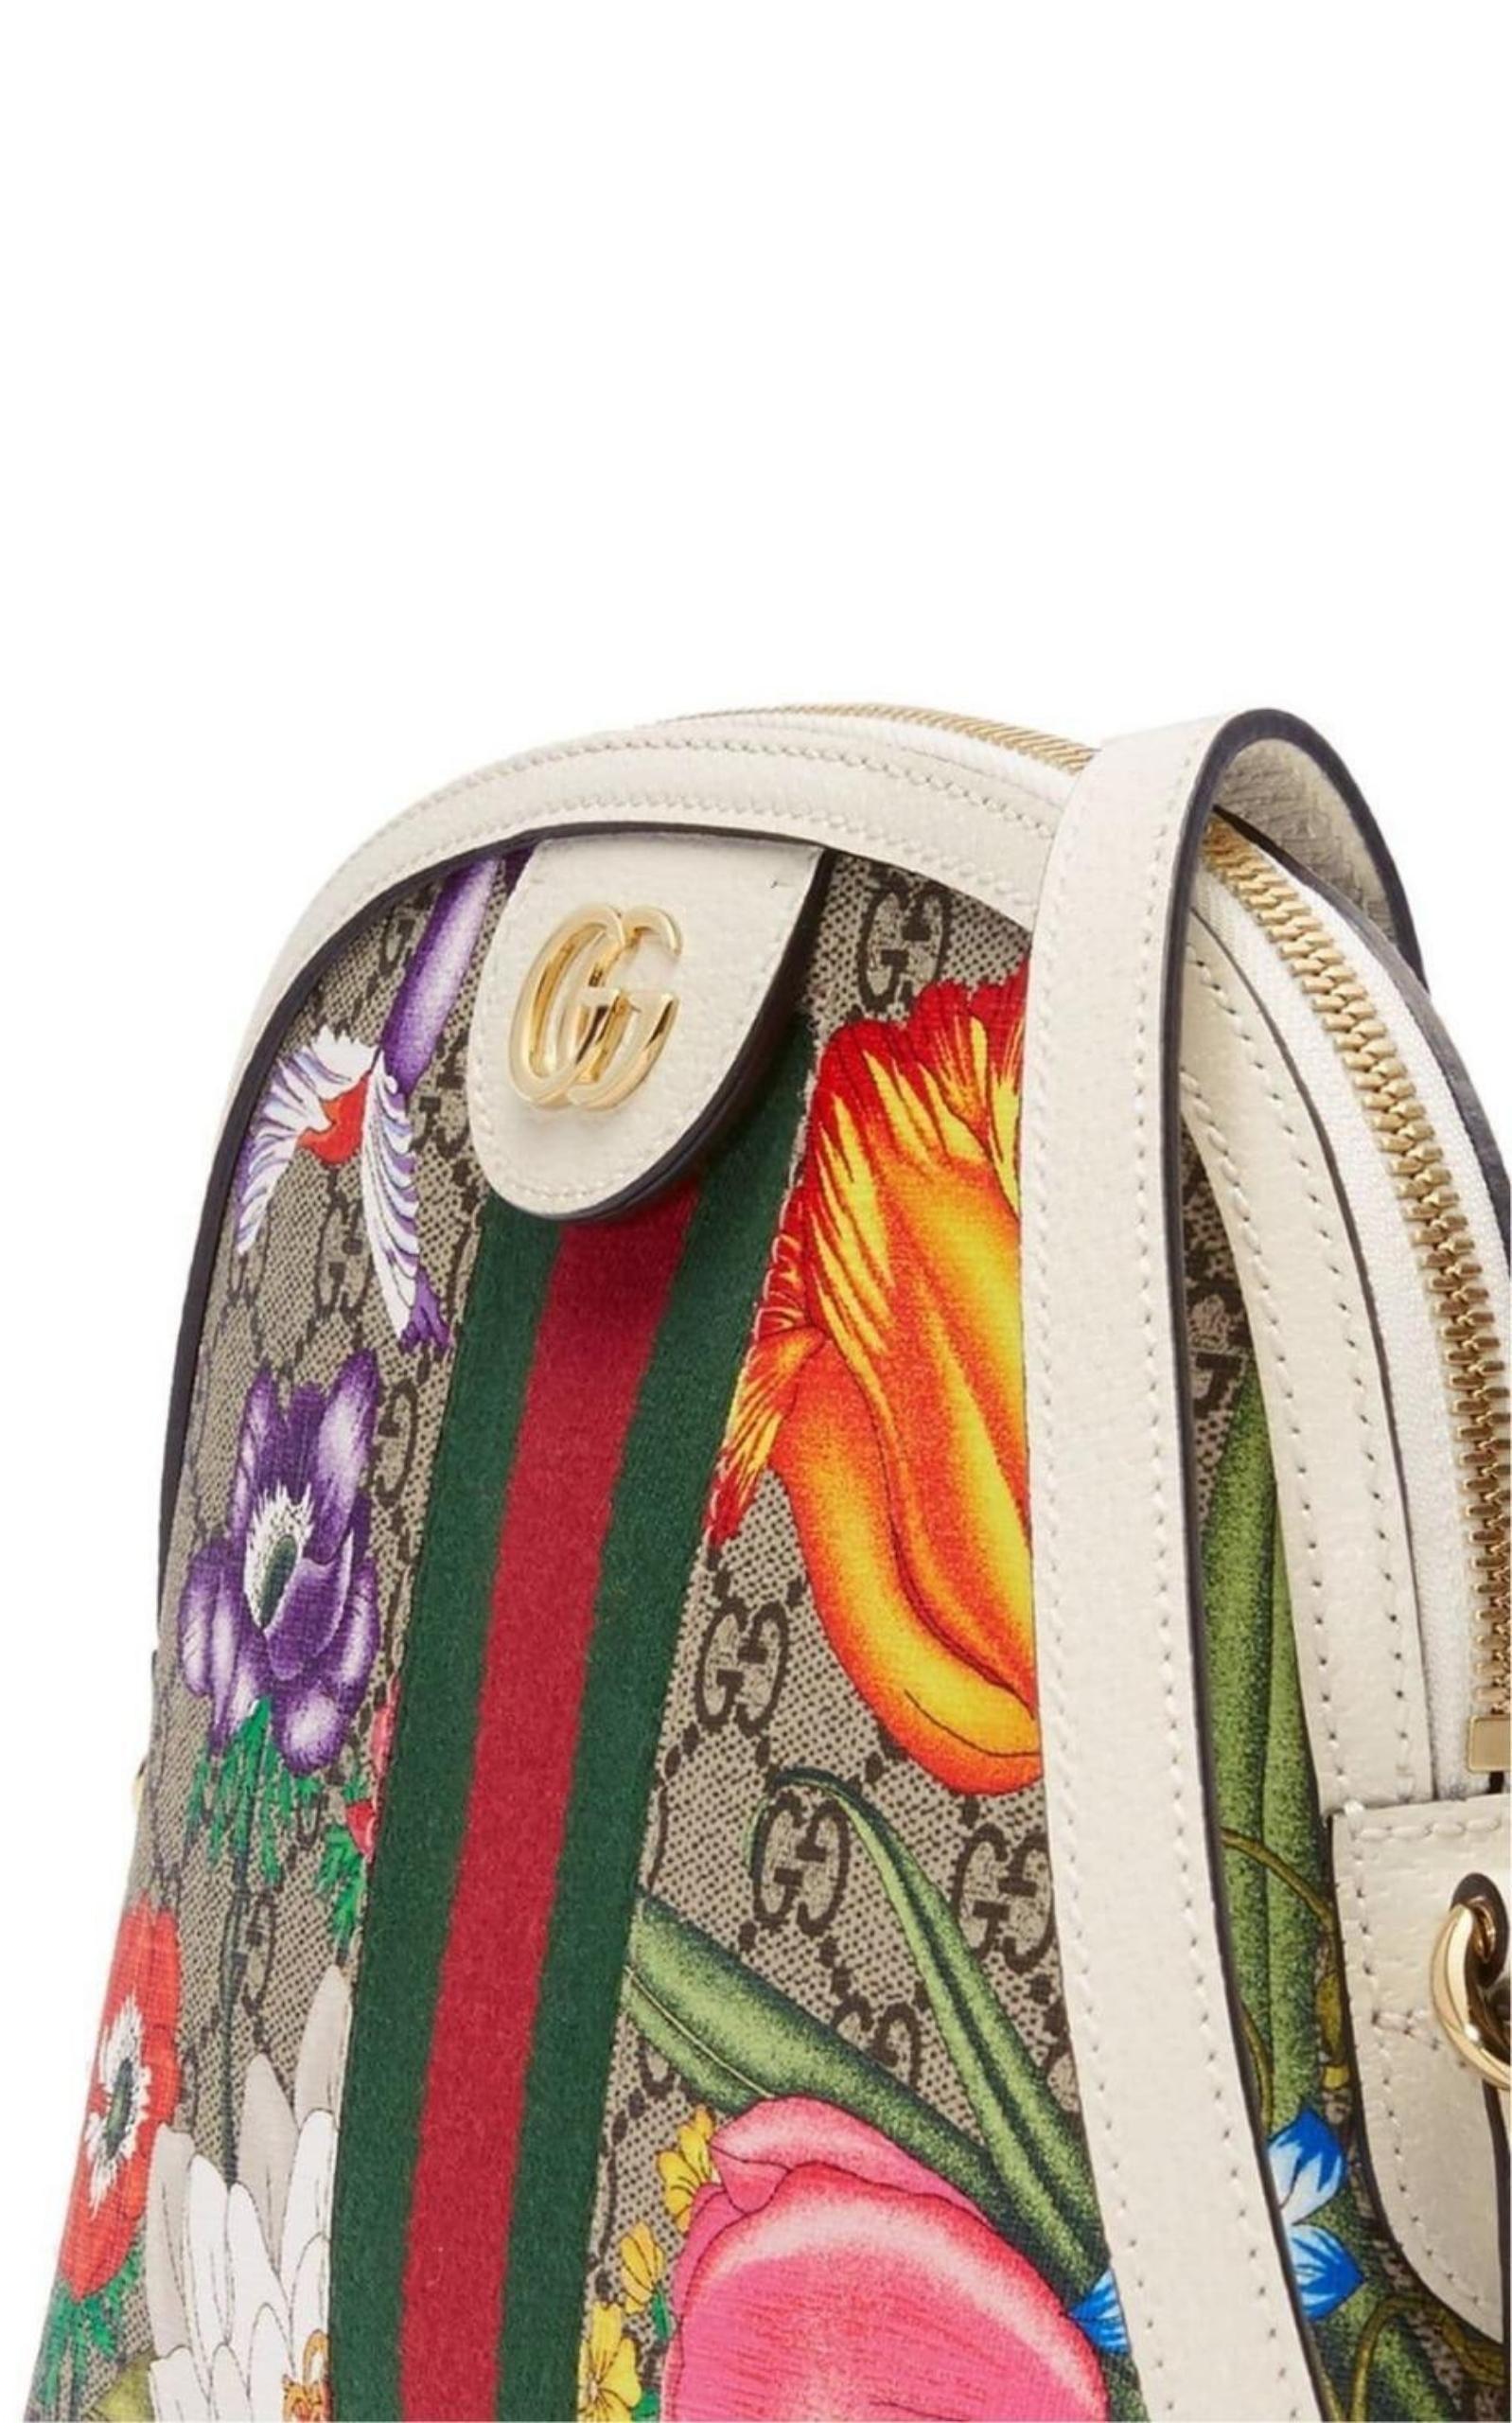 Gucci Multicolor Flora GG Supreme Coated Canvas and Leather